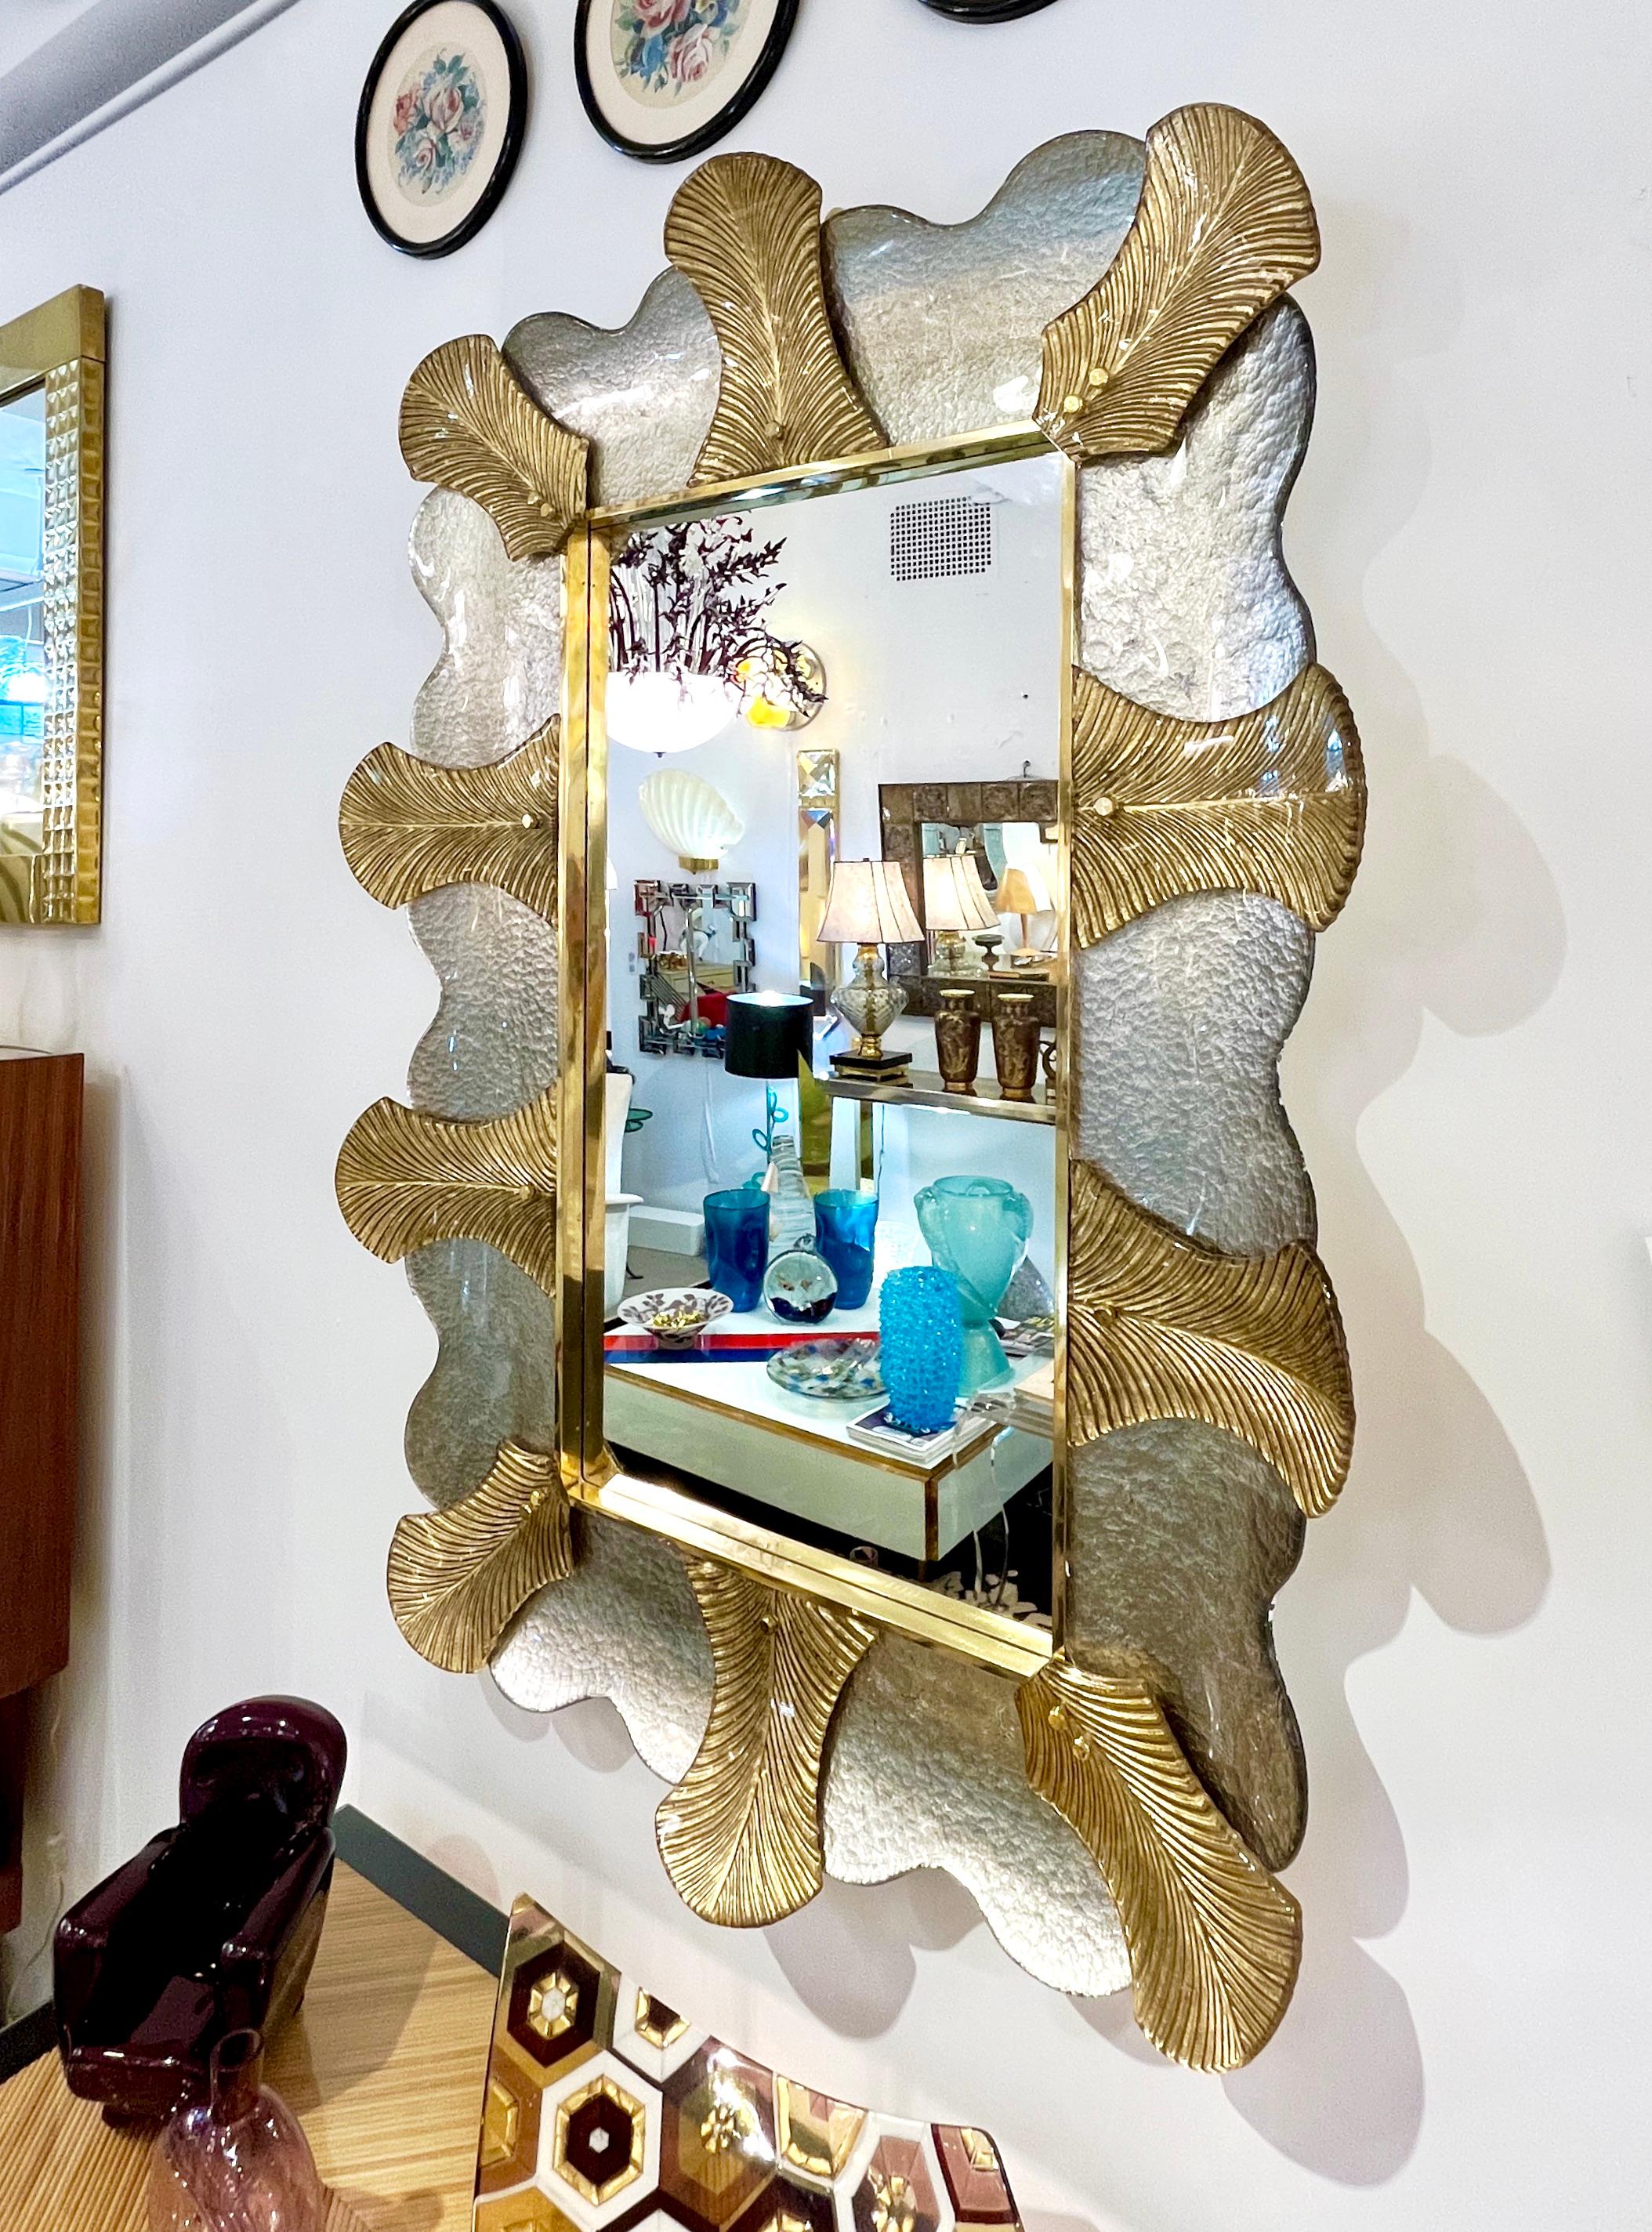 A pair is available now - Venetian contemporary Couture design rectangular wall mirror, custom made in Italy, framed with a thick border in Art Deco Design, composed of high quality blown Murano art glass textured leaves worked with 24-karat gold